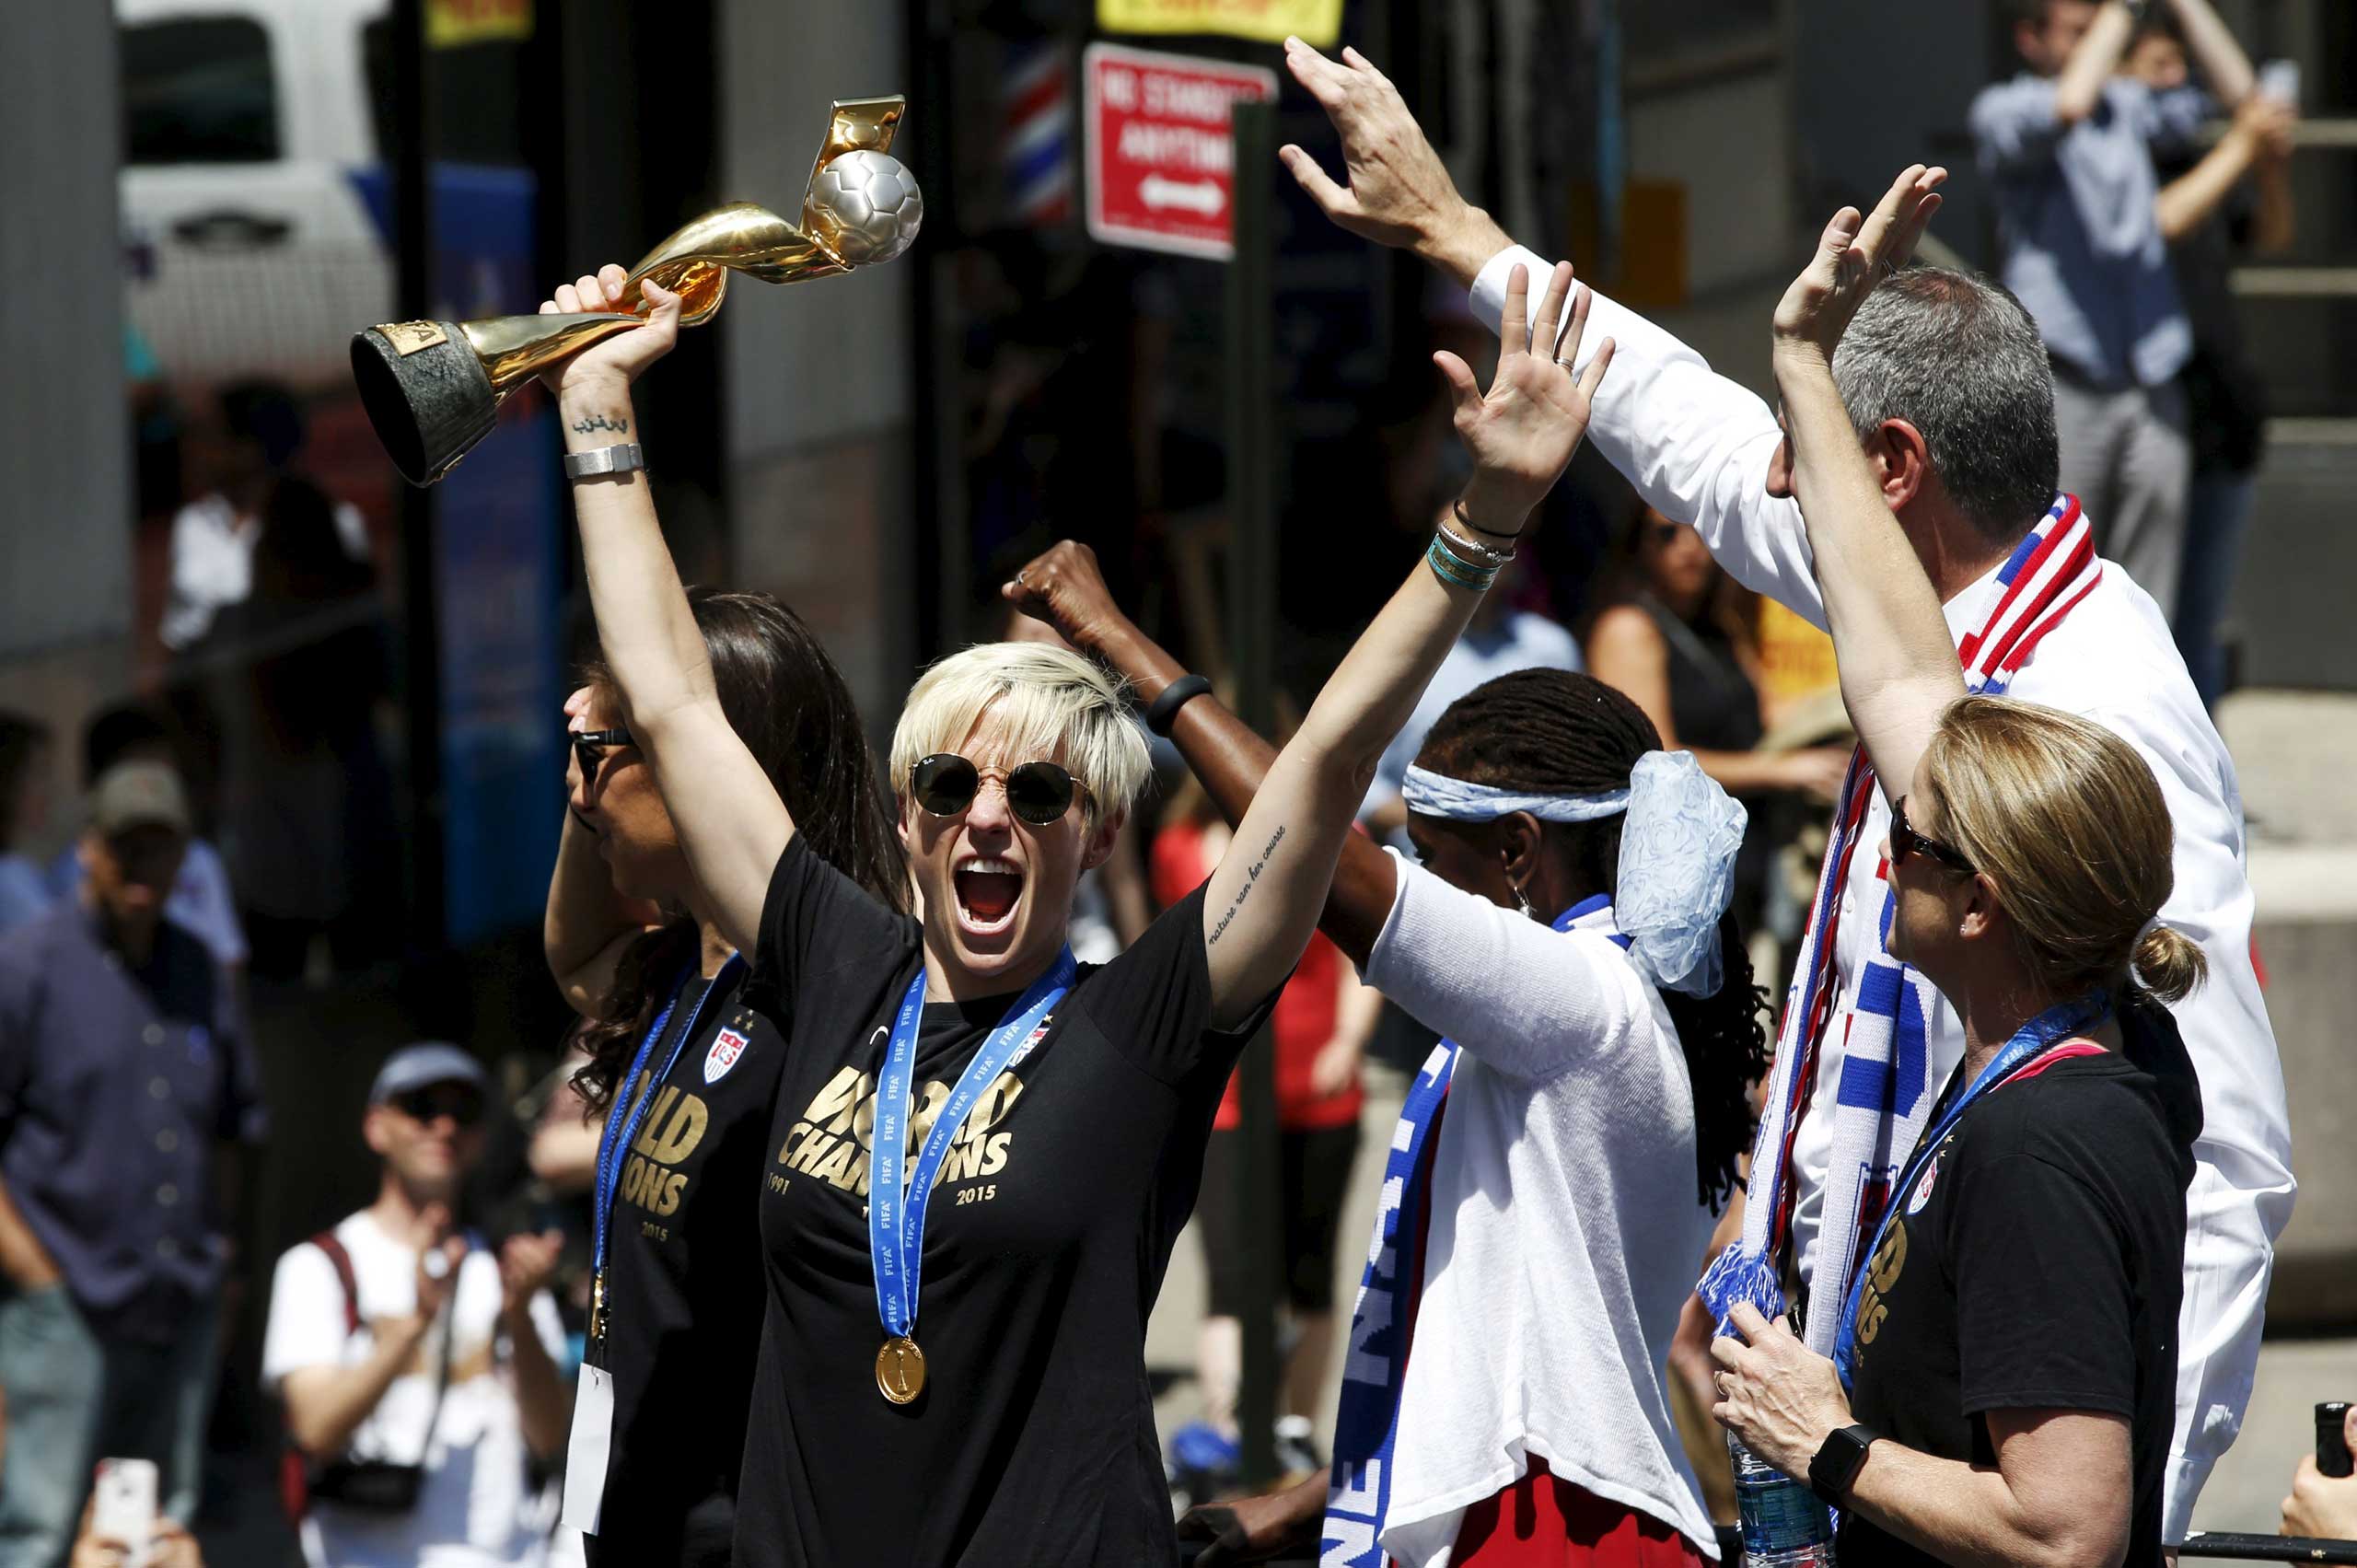 U.S. women's soccer player Megan Rapinoe holds the Wold Cup trophy as she rides a float with team mate Carli Lloyd and New York Mayor Bill de Blasio during the ticker tape parade in New York City on July 10, 2015.